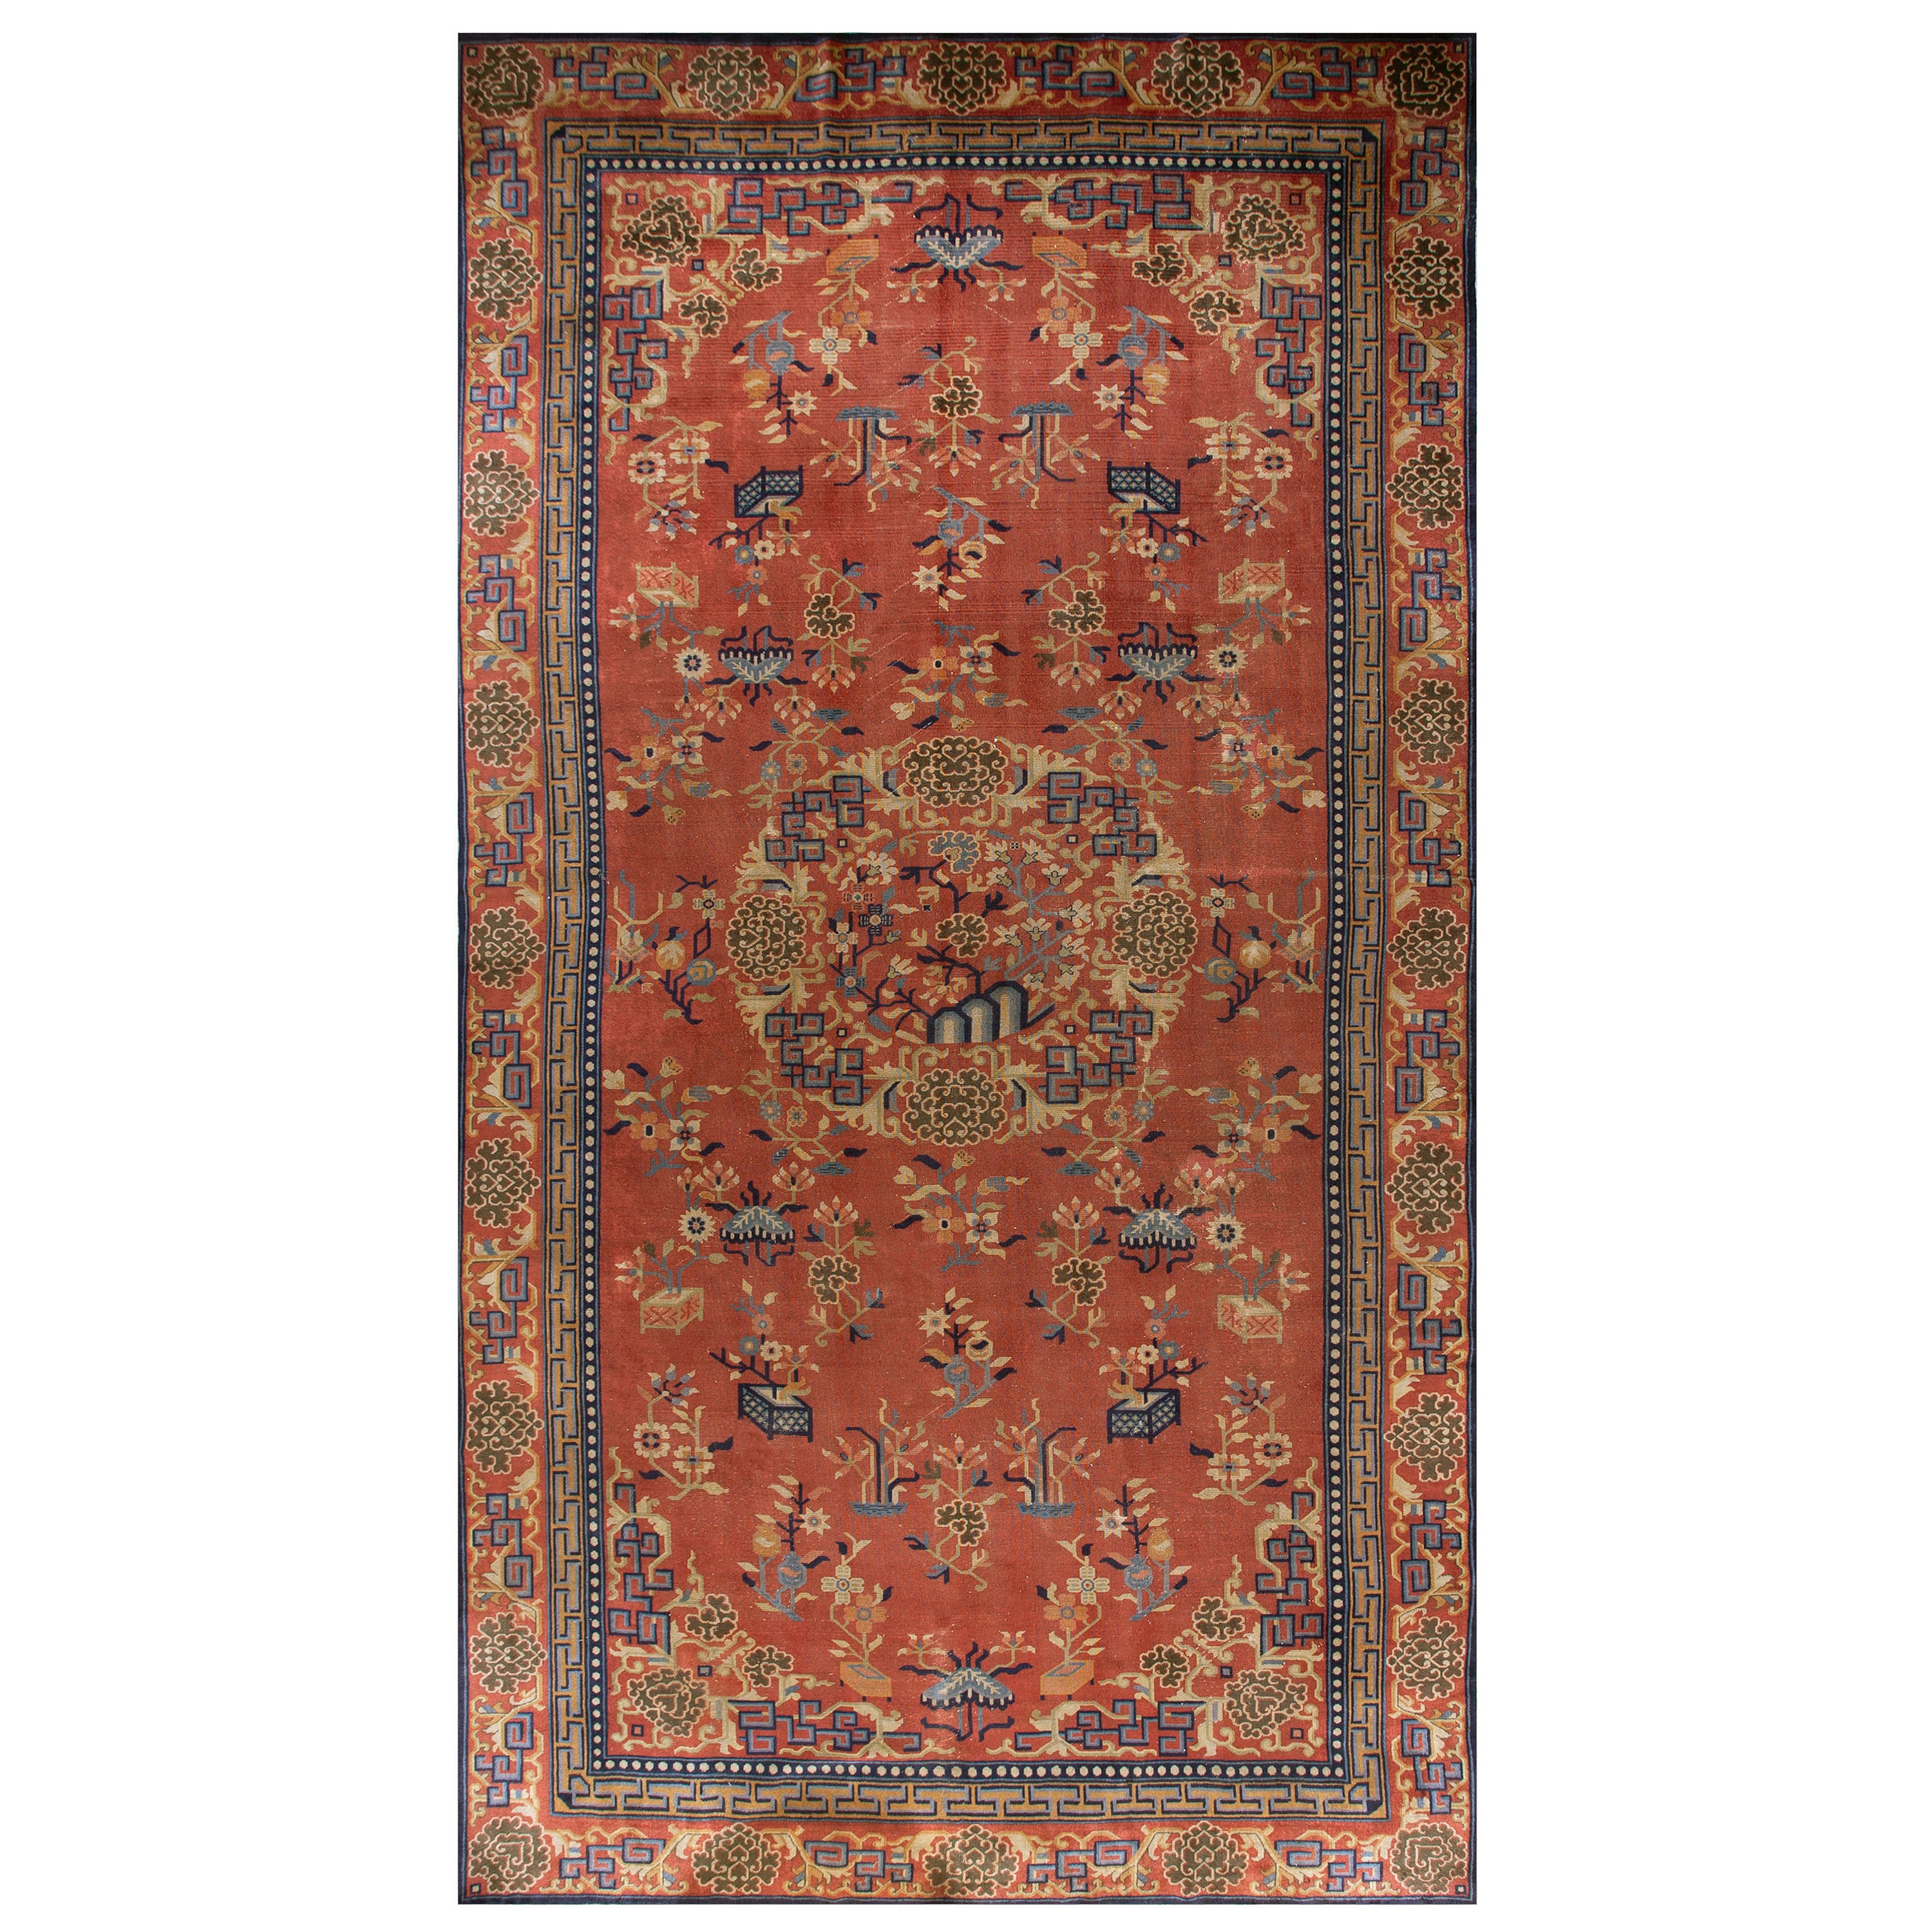 Early 20th Century Chinese Carpet ( 10'4"x 19'3" - 315 x 587 ) For Sale